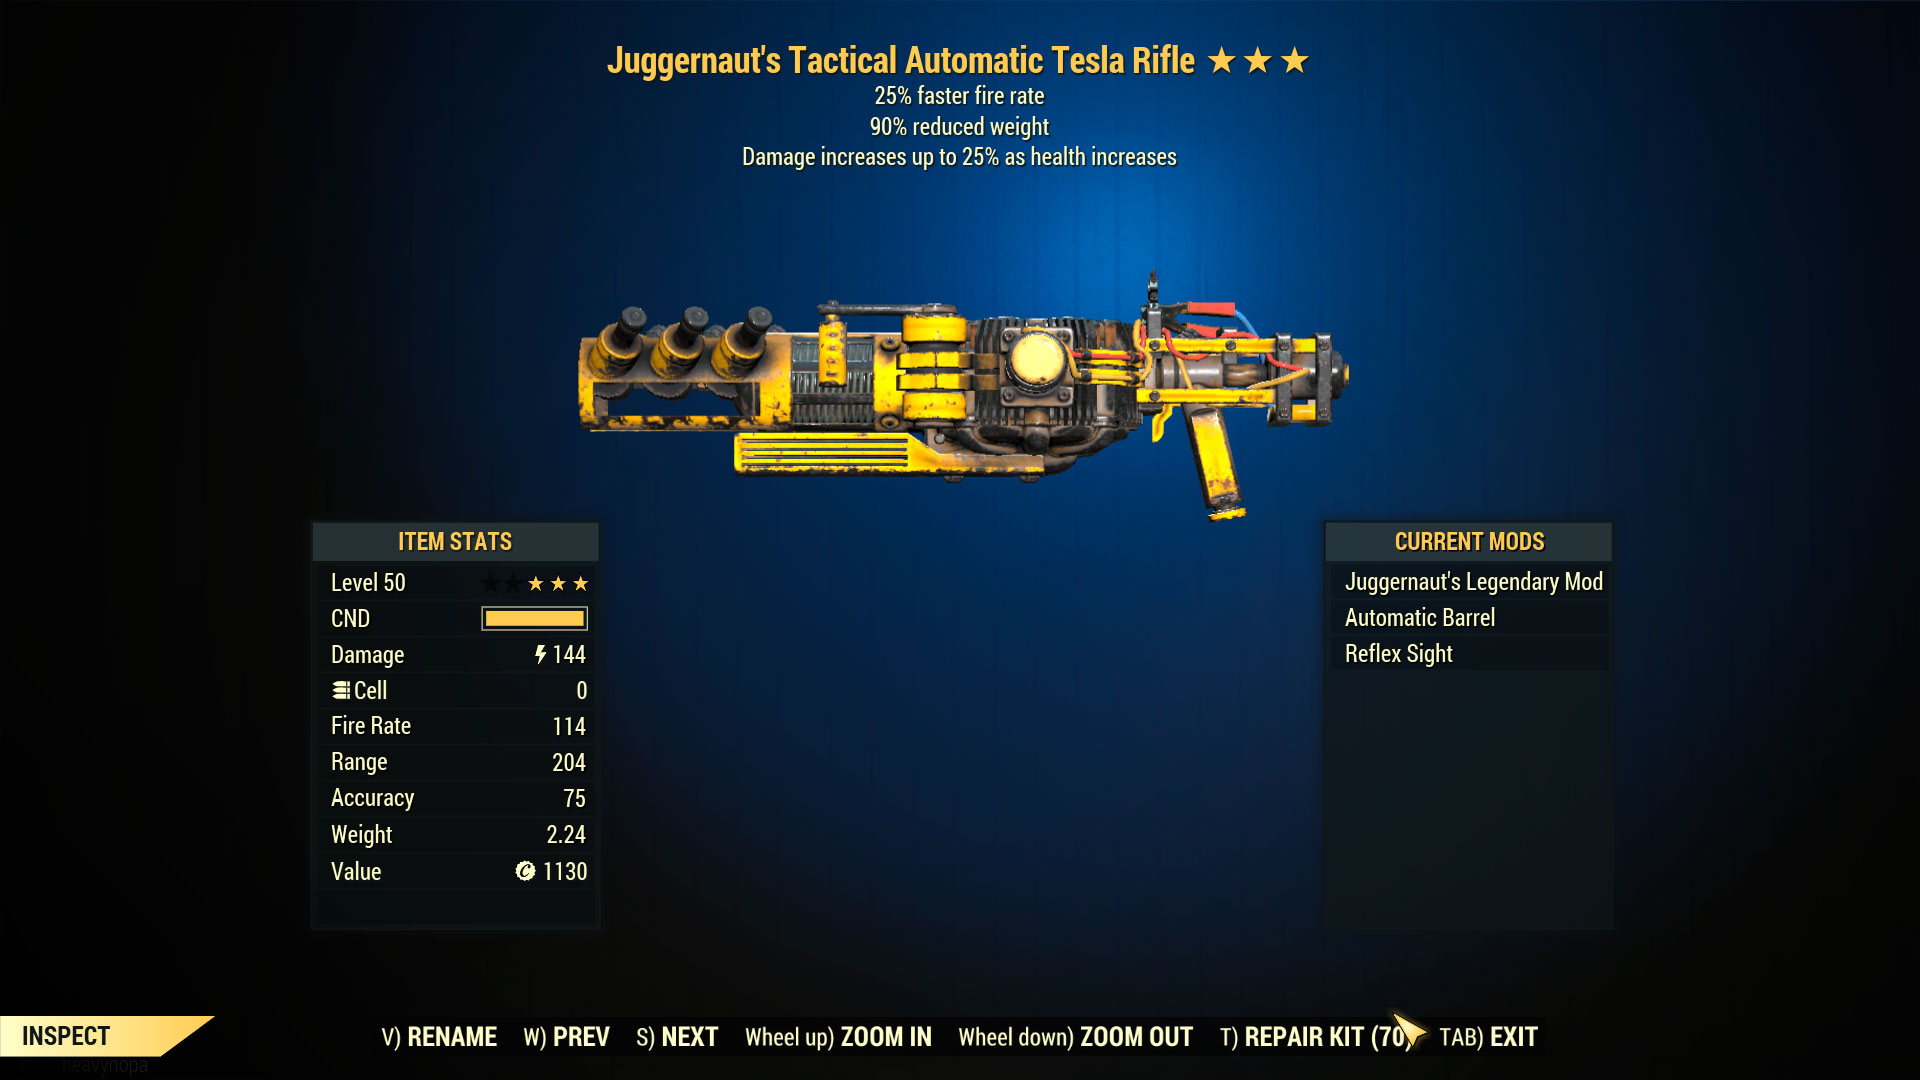 Juggernaut's Tesla Rifle (25% faster fire rate/90% reduced weight)